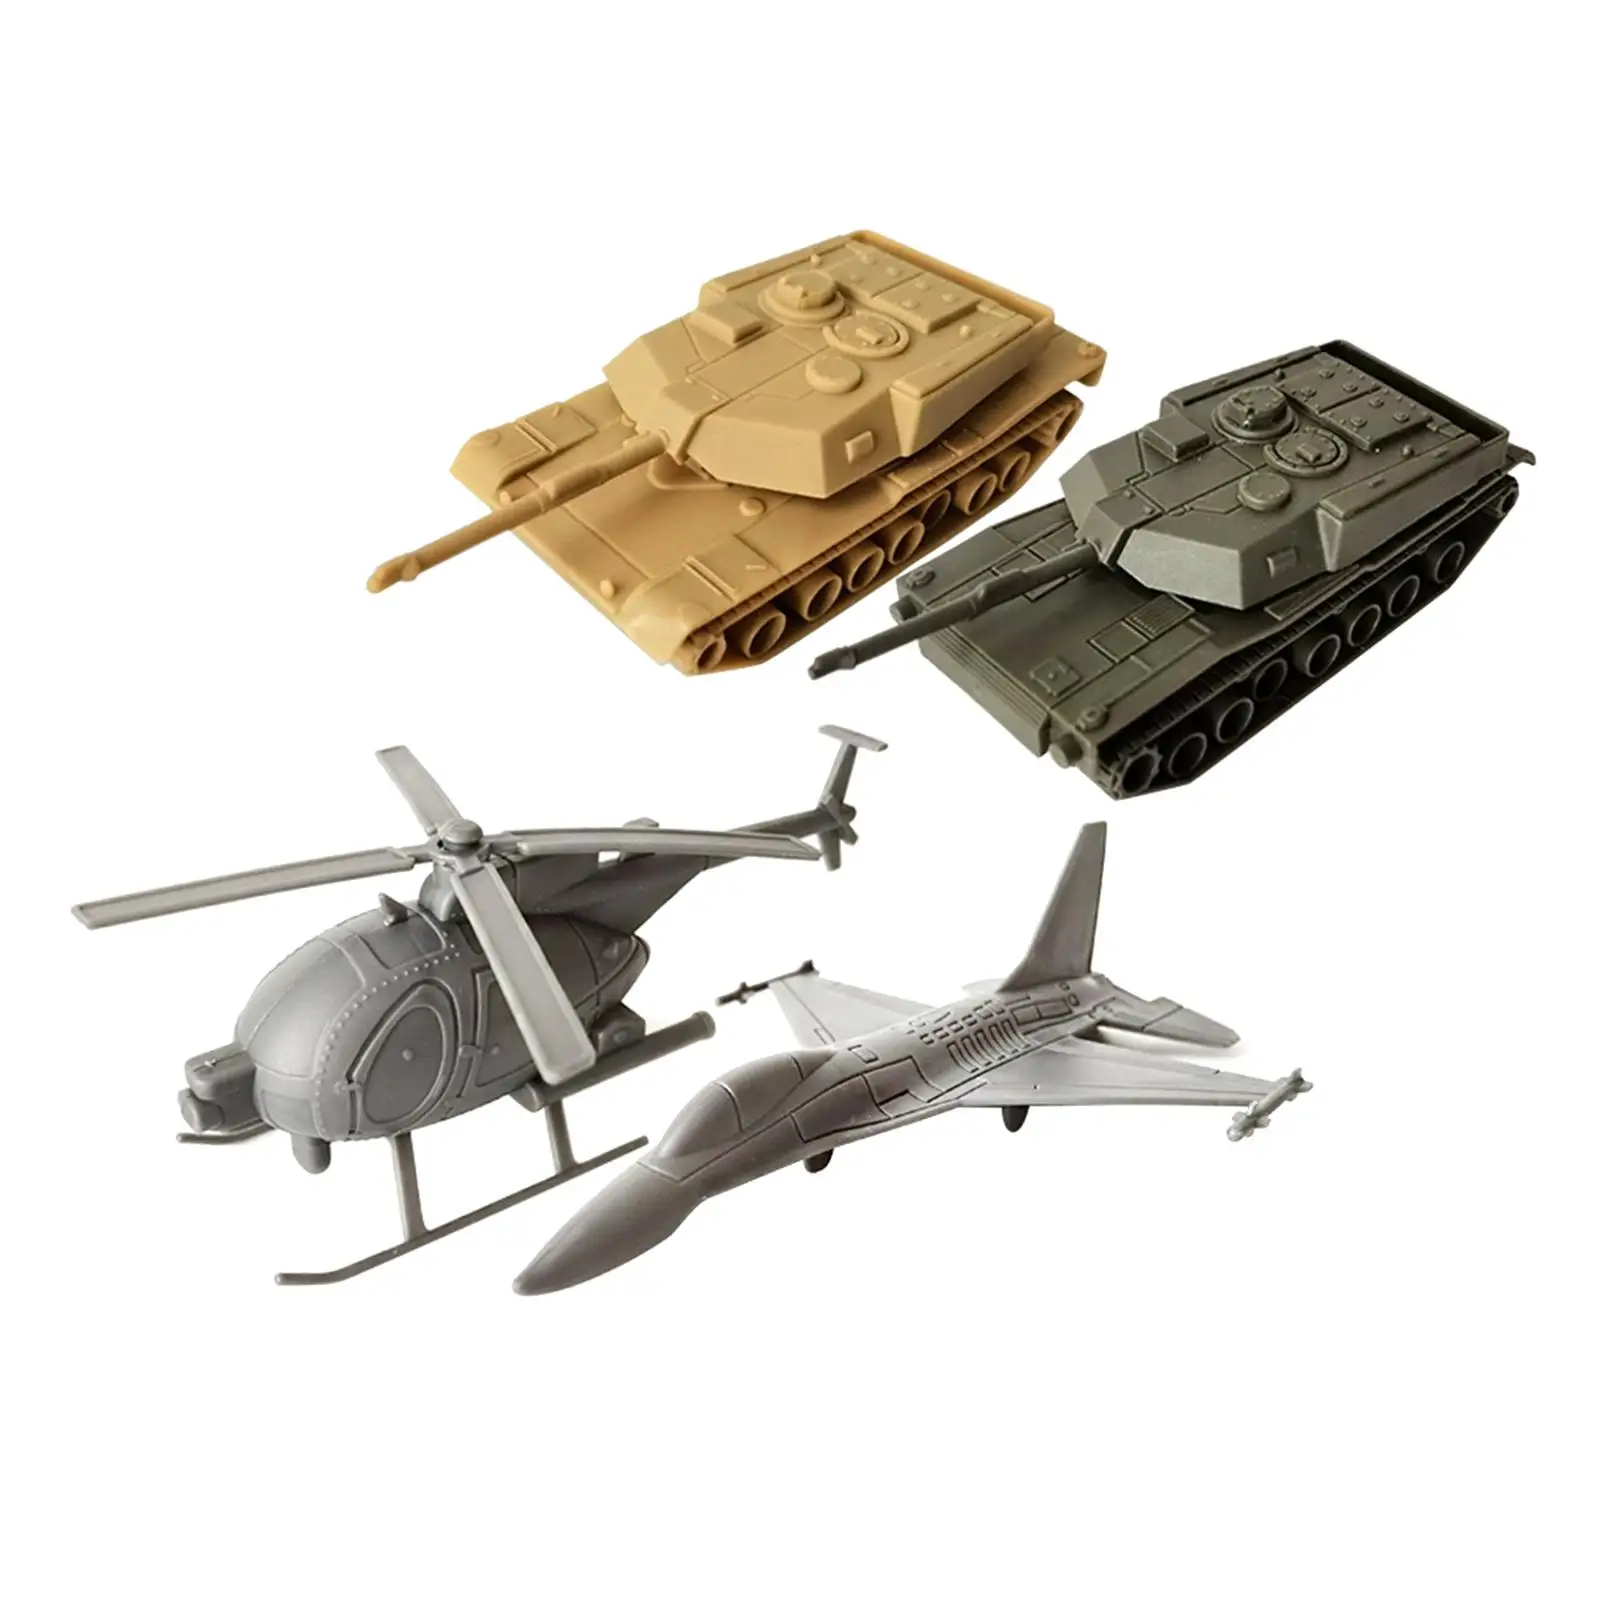 4 Pieces 3D Puzzles Helicopter and Fighter Model Toy Building Kits 4D Modern Tank and Aircraft for Kids Keepsake Tabletop Decor